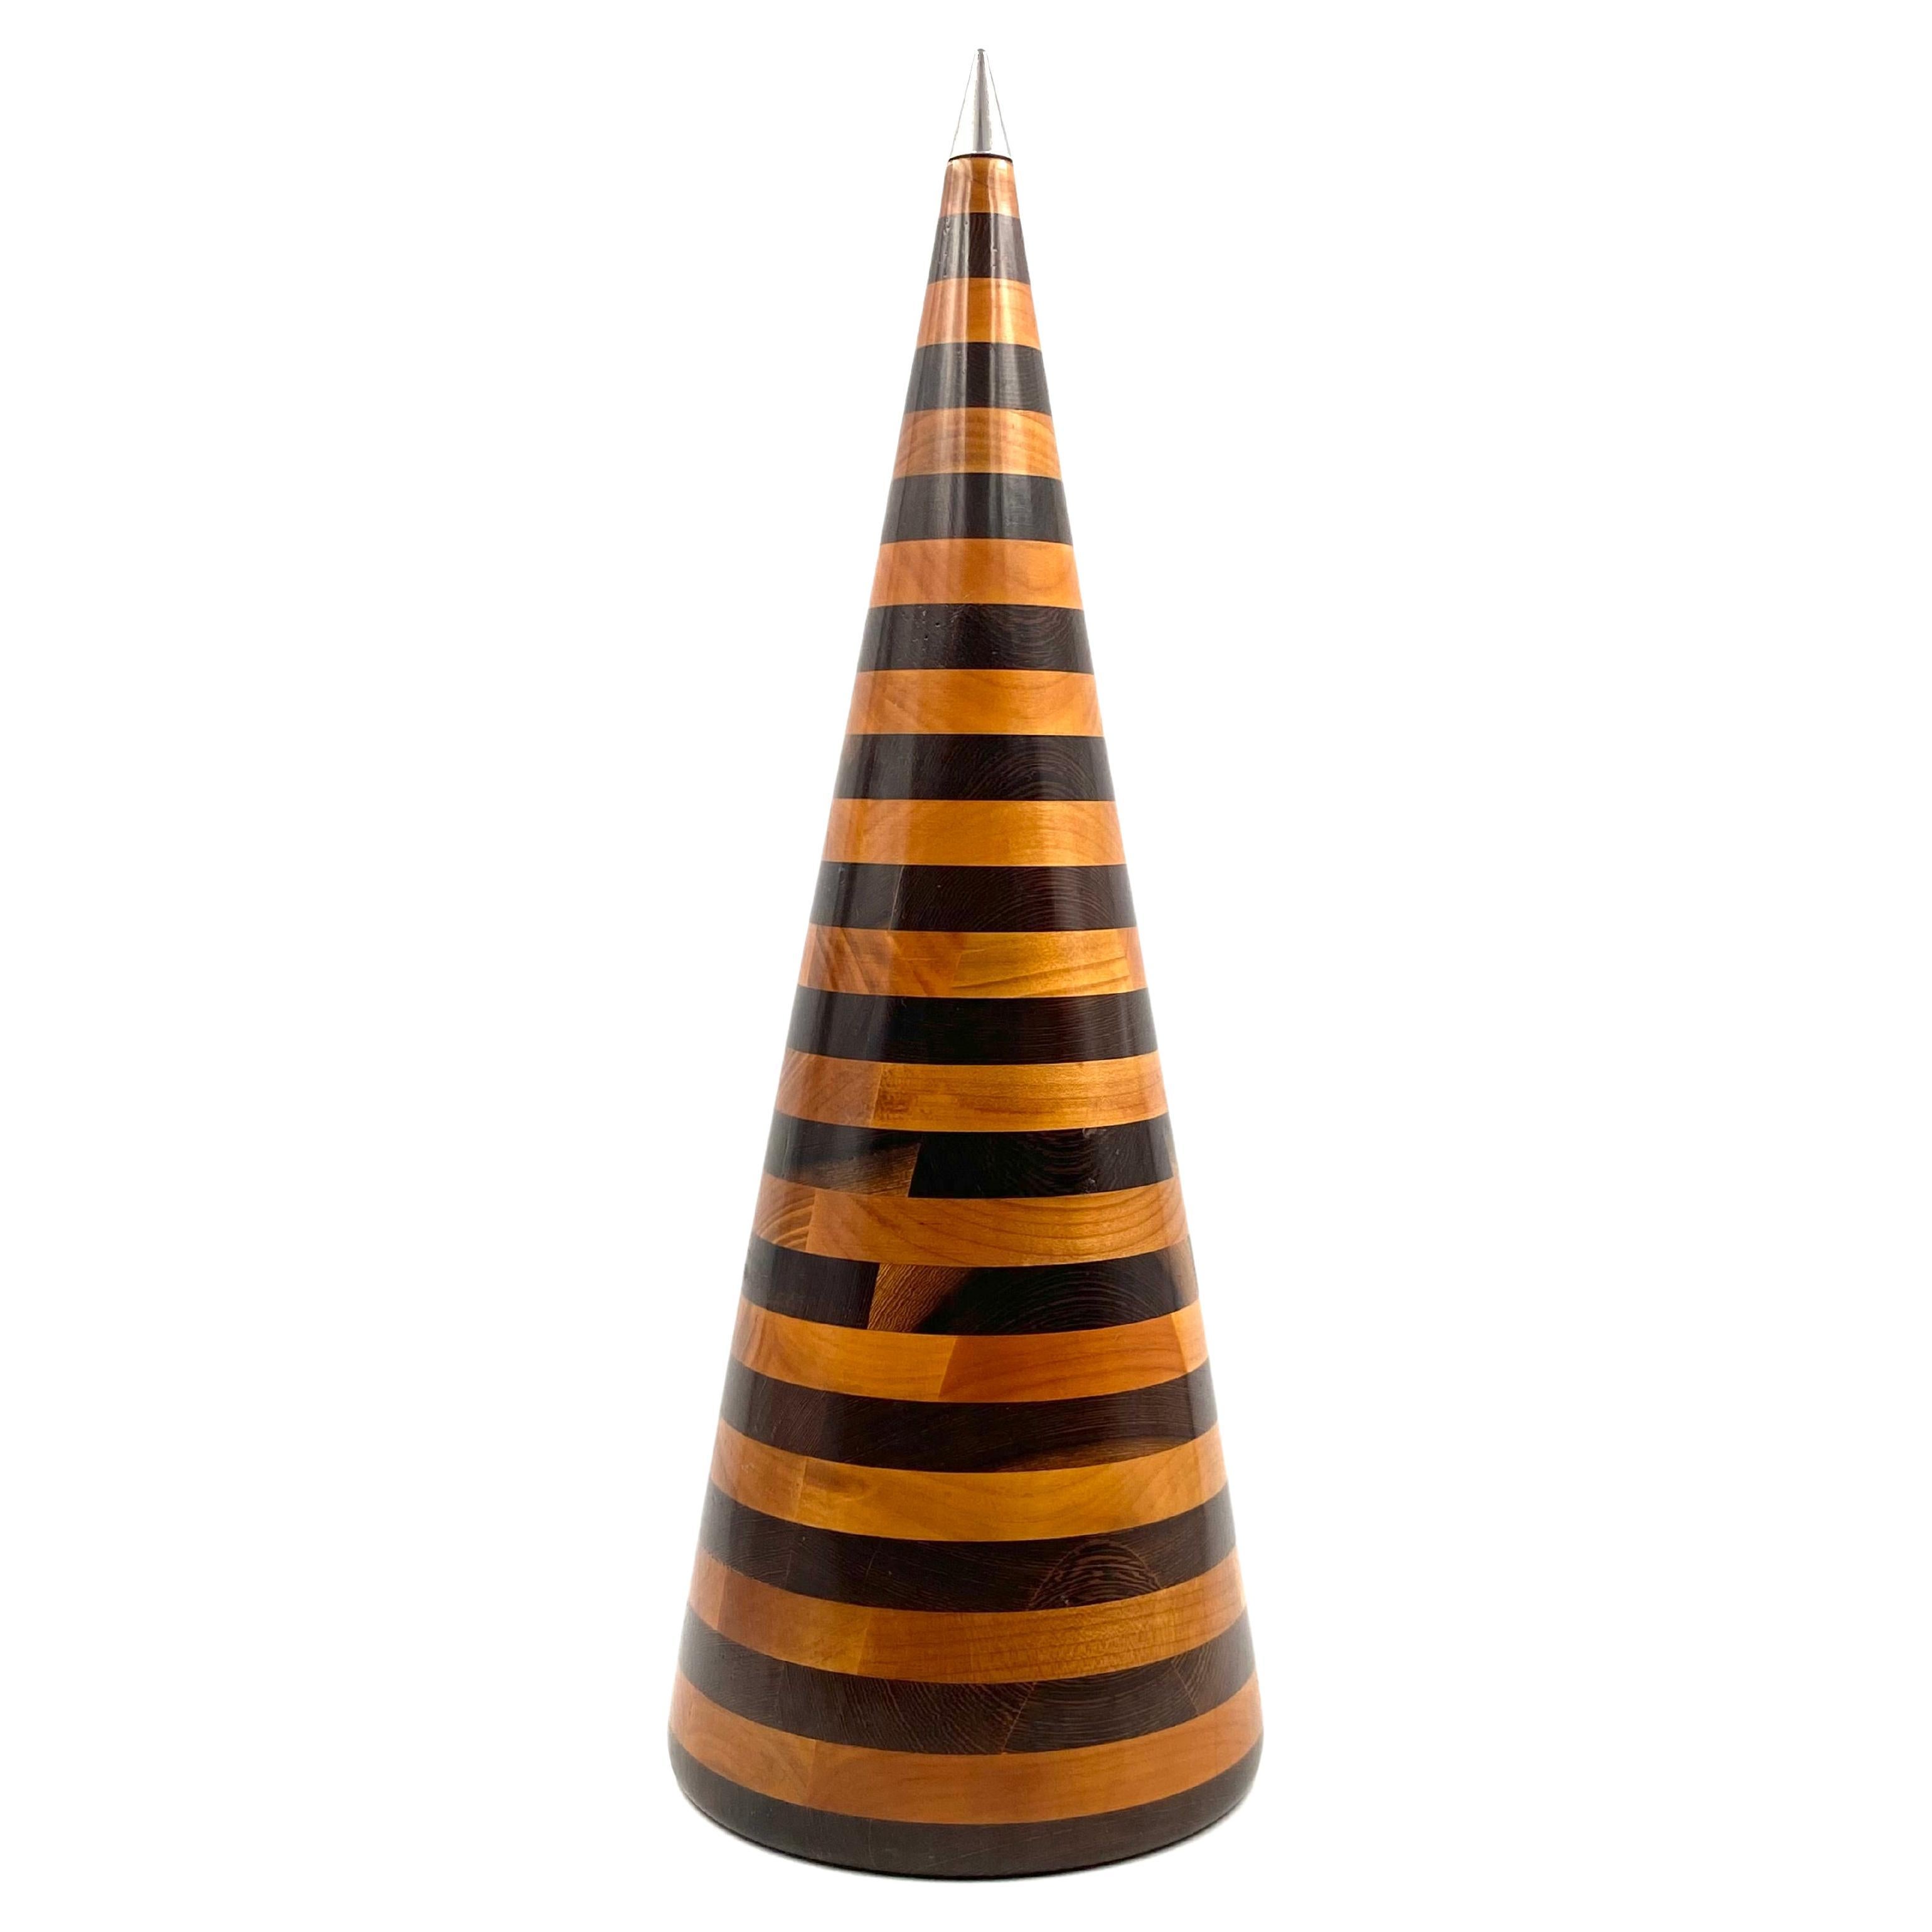 Conic Solid Wood Sculpture, Salmistraro, Italy, 1970s For Sale